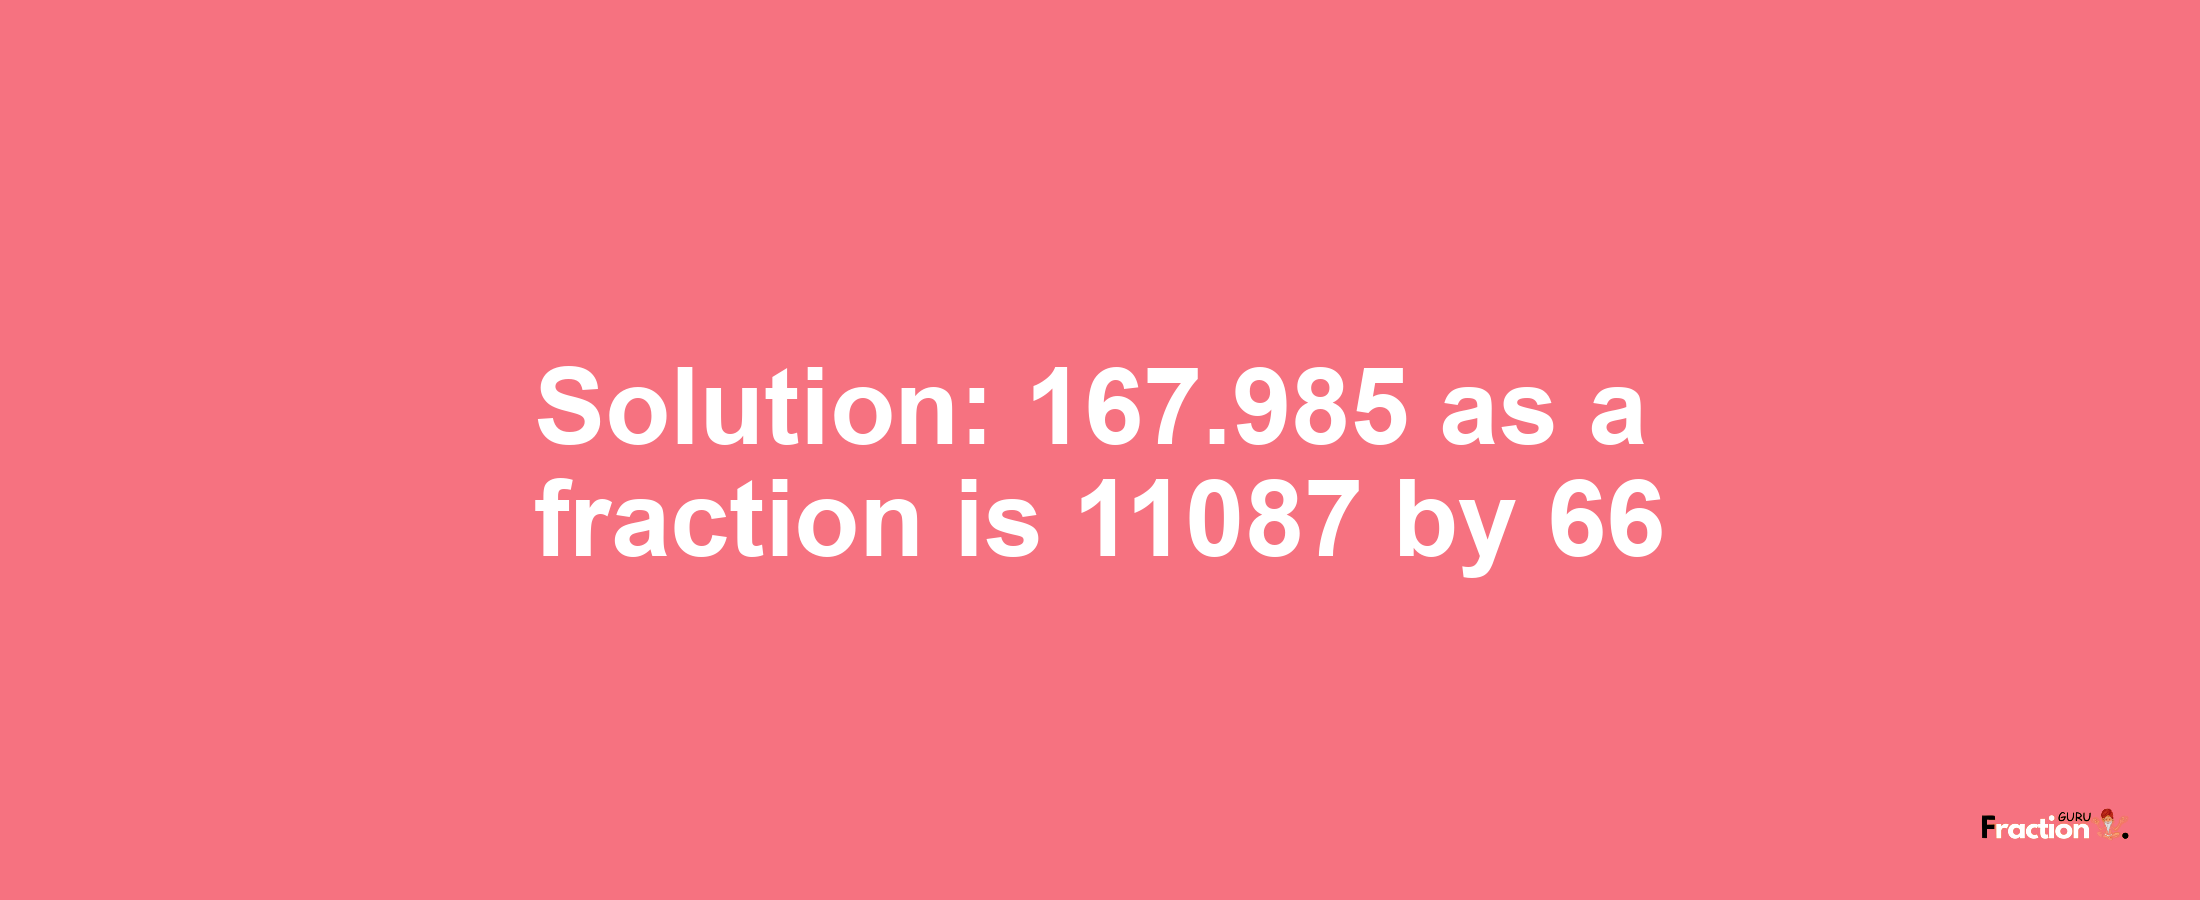 Solution:167.985 as a fraction is 11087/66